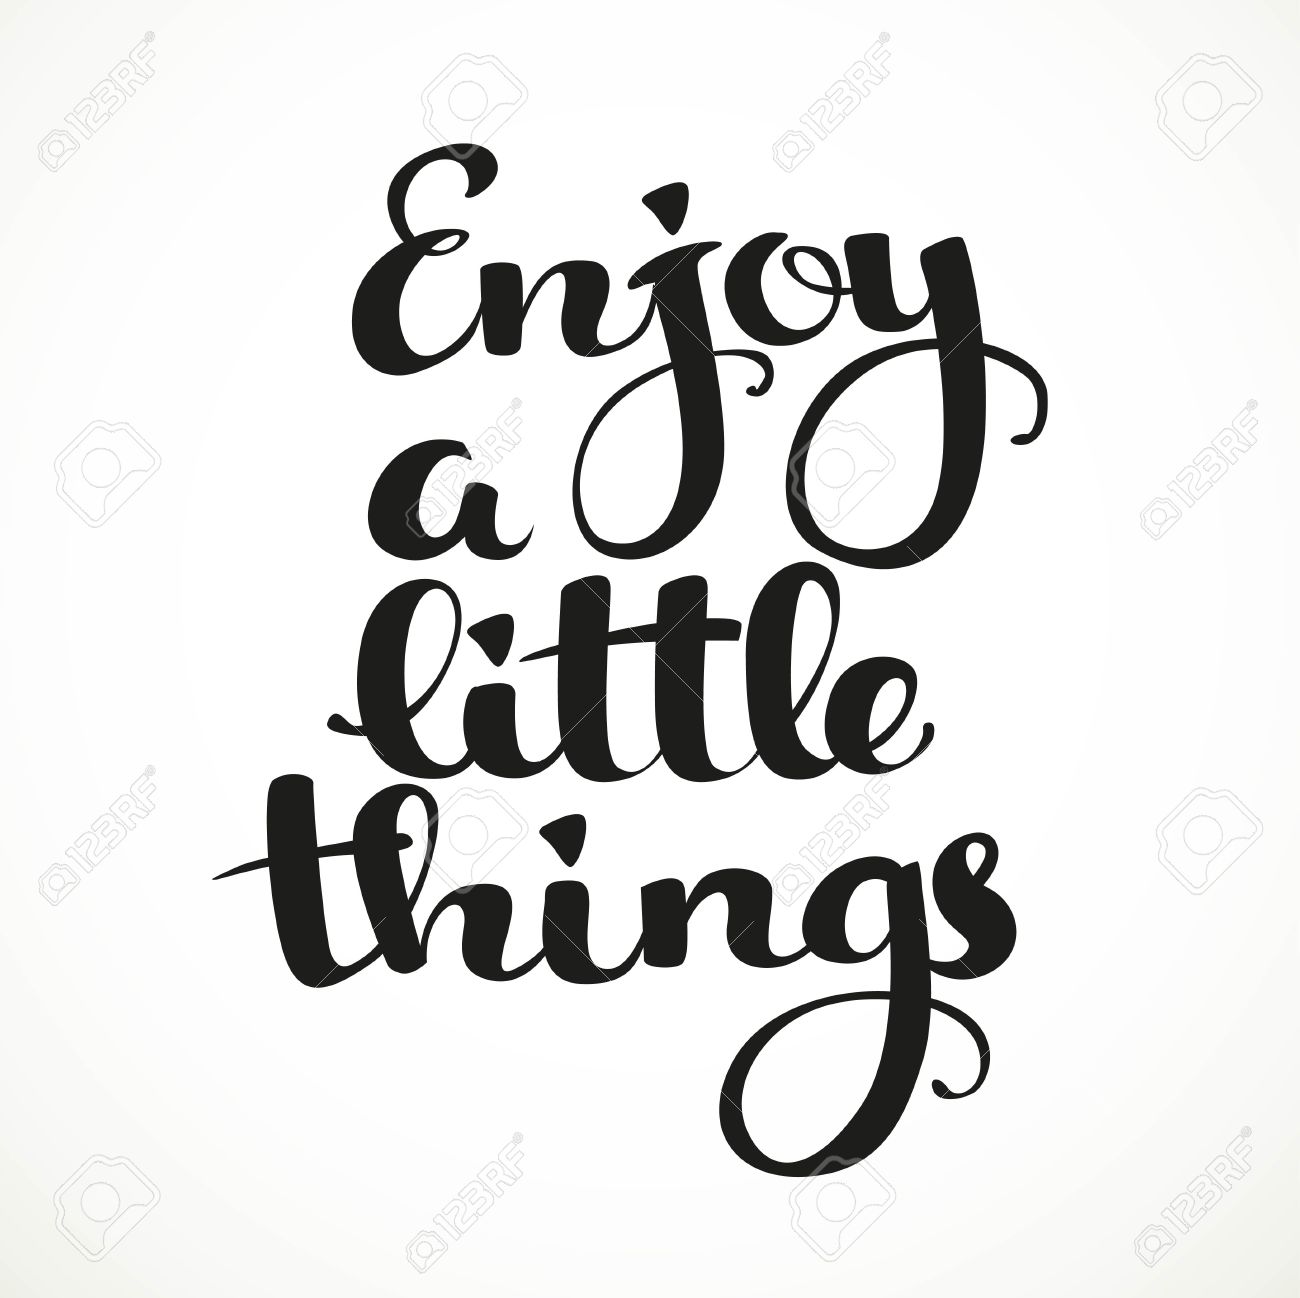 THE LITTLE THINGS CLIPART - 124px Image #14